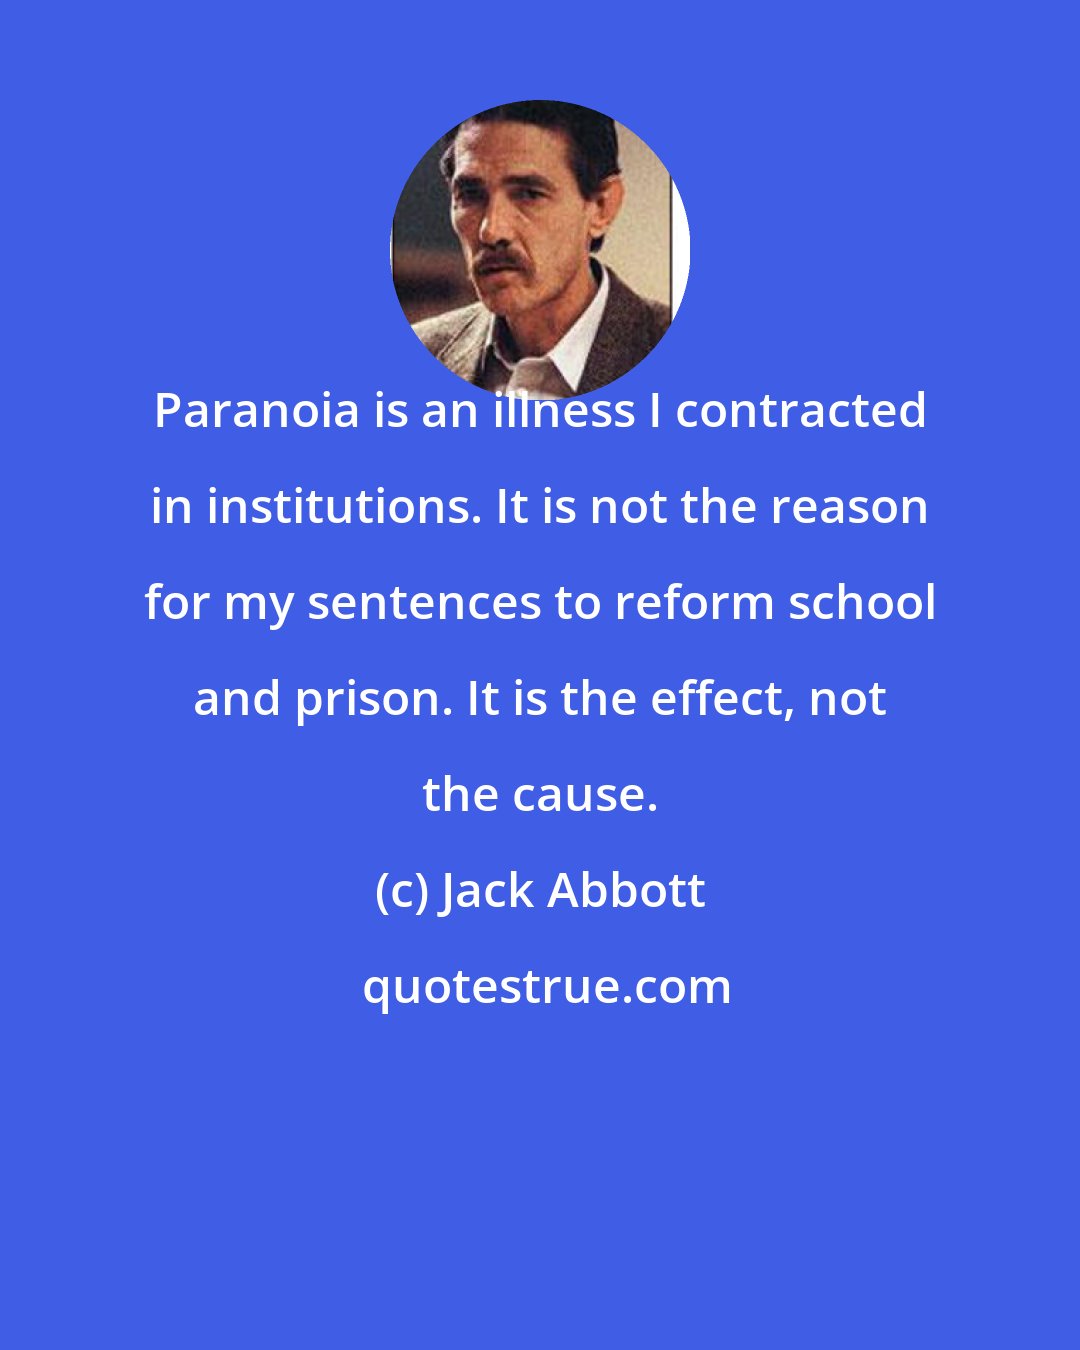 Jack Abbott: Paranoia is an illness I contracted in institutions. It is not the reason for my sentences to reform school and prison. It is the effect, not the cause.